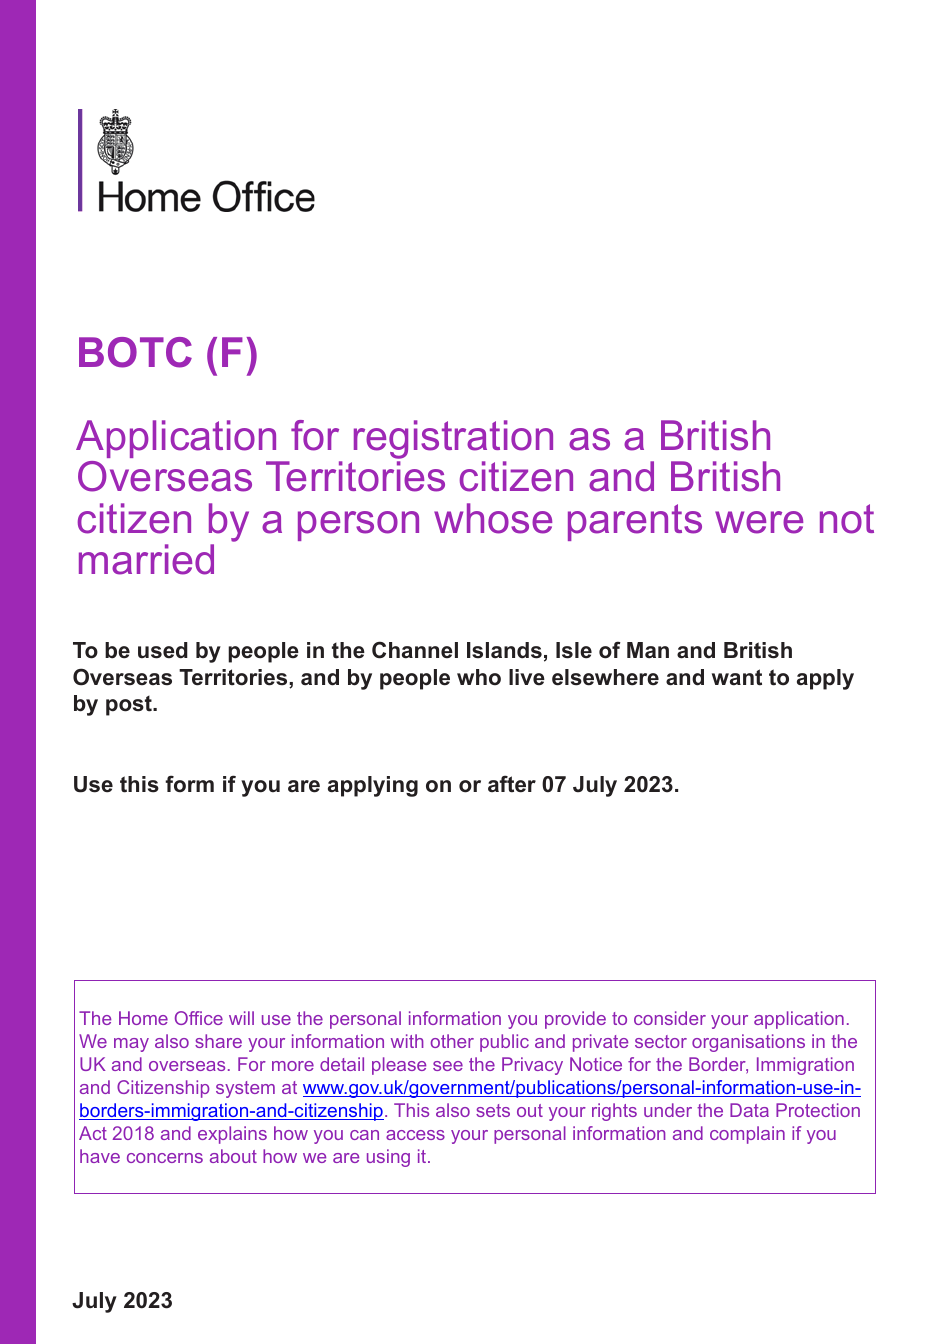 Form BOTC (F) Application for Registration as a British Overseas Territories Citizen and British Citizen by a Person Whose Parents Were Not Married - United Kingdom, Page 1